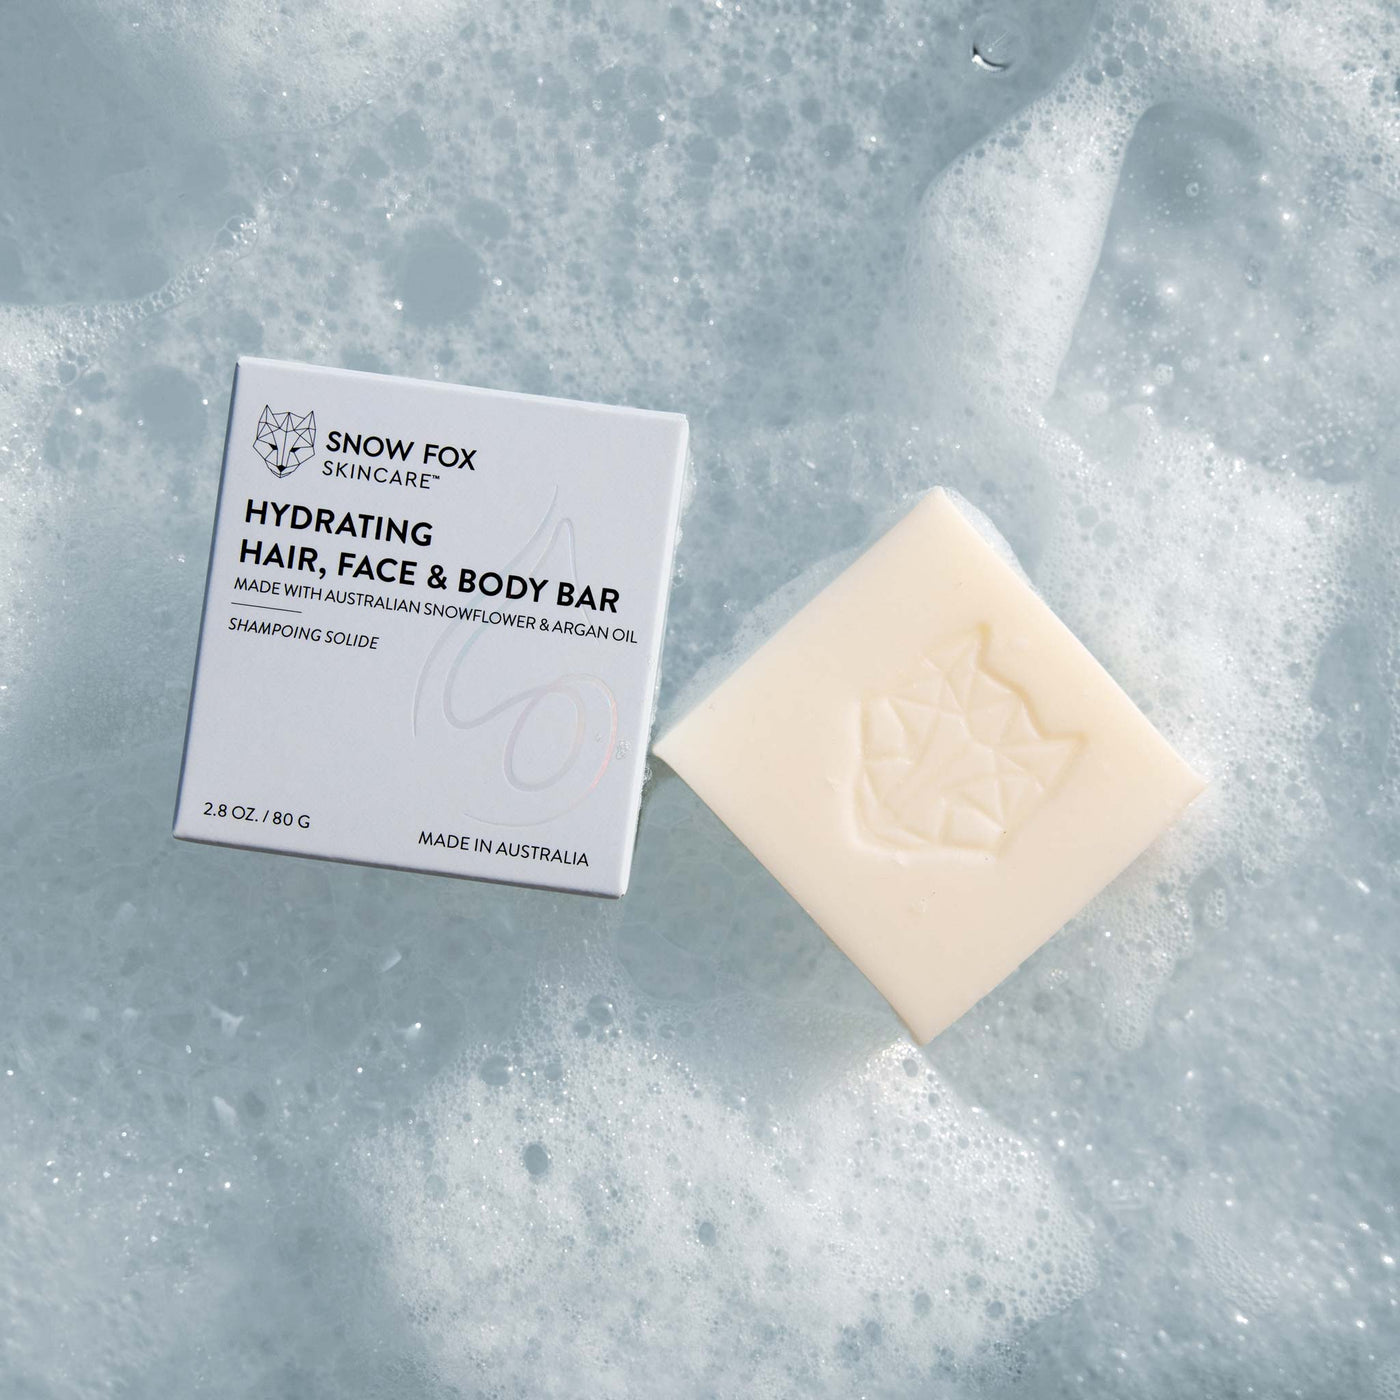 hydrating hair, face and body cleansing bar